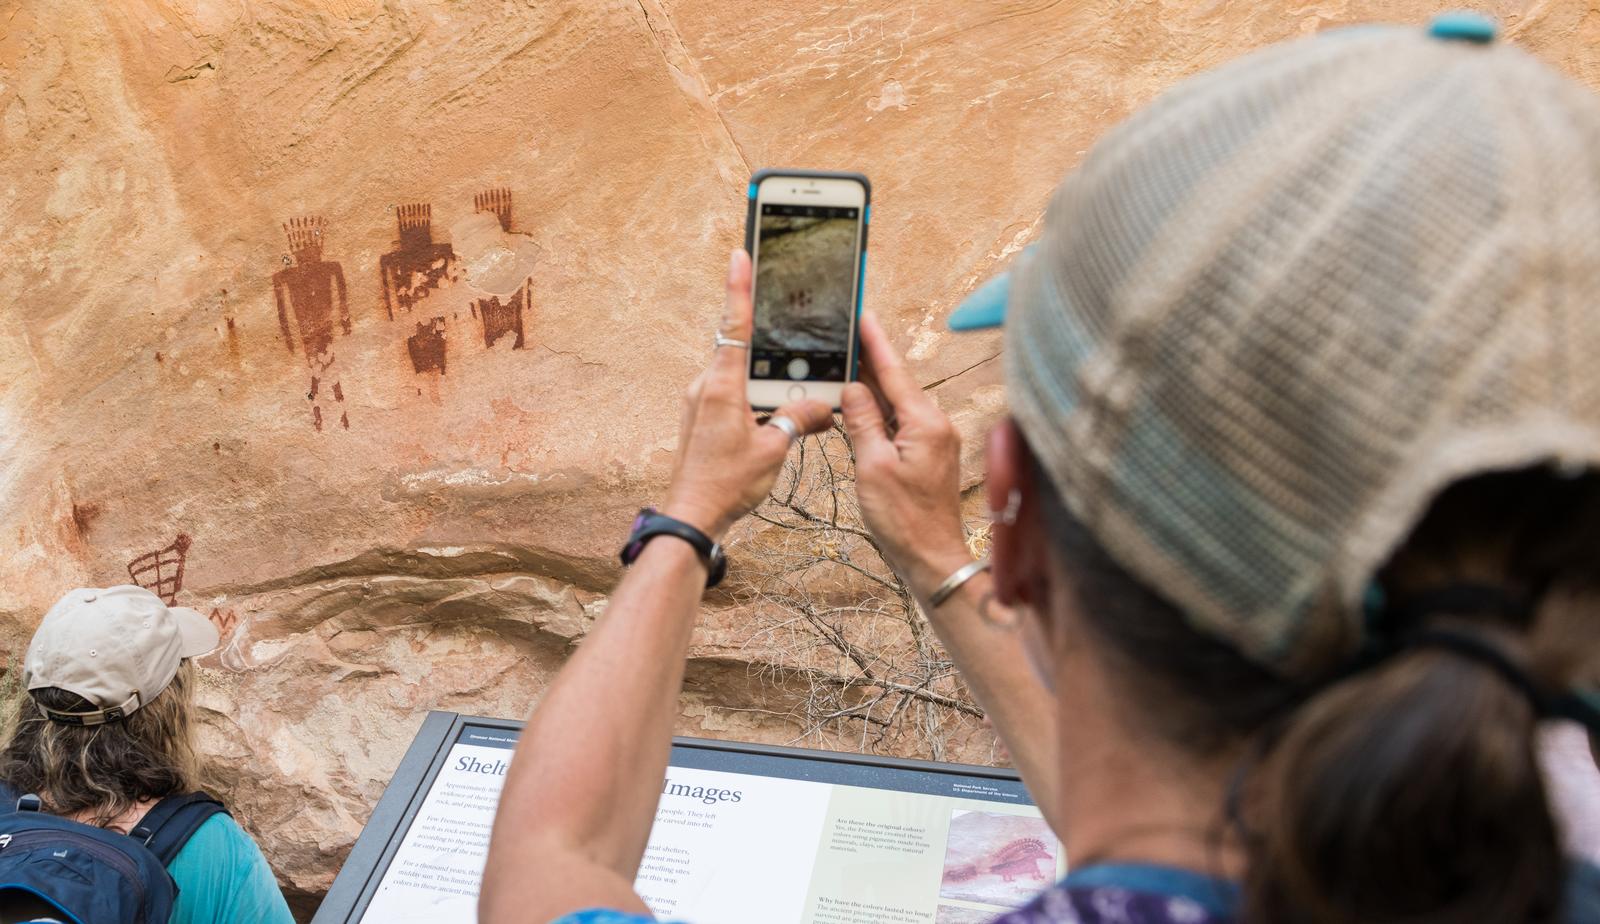 A woman using a smart phone in a case to photograph petroglyphs